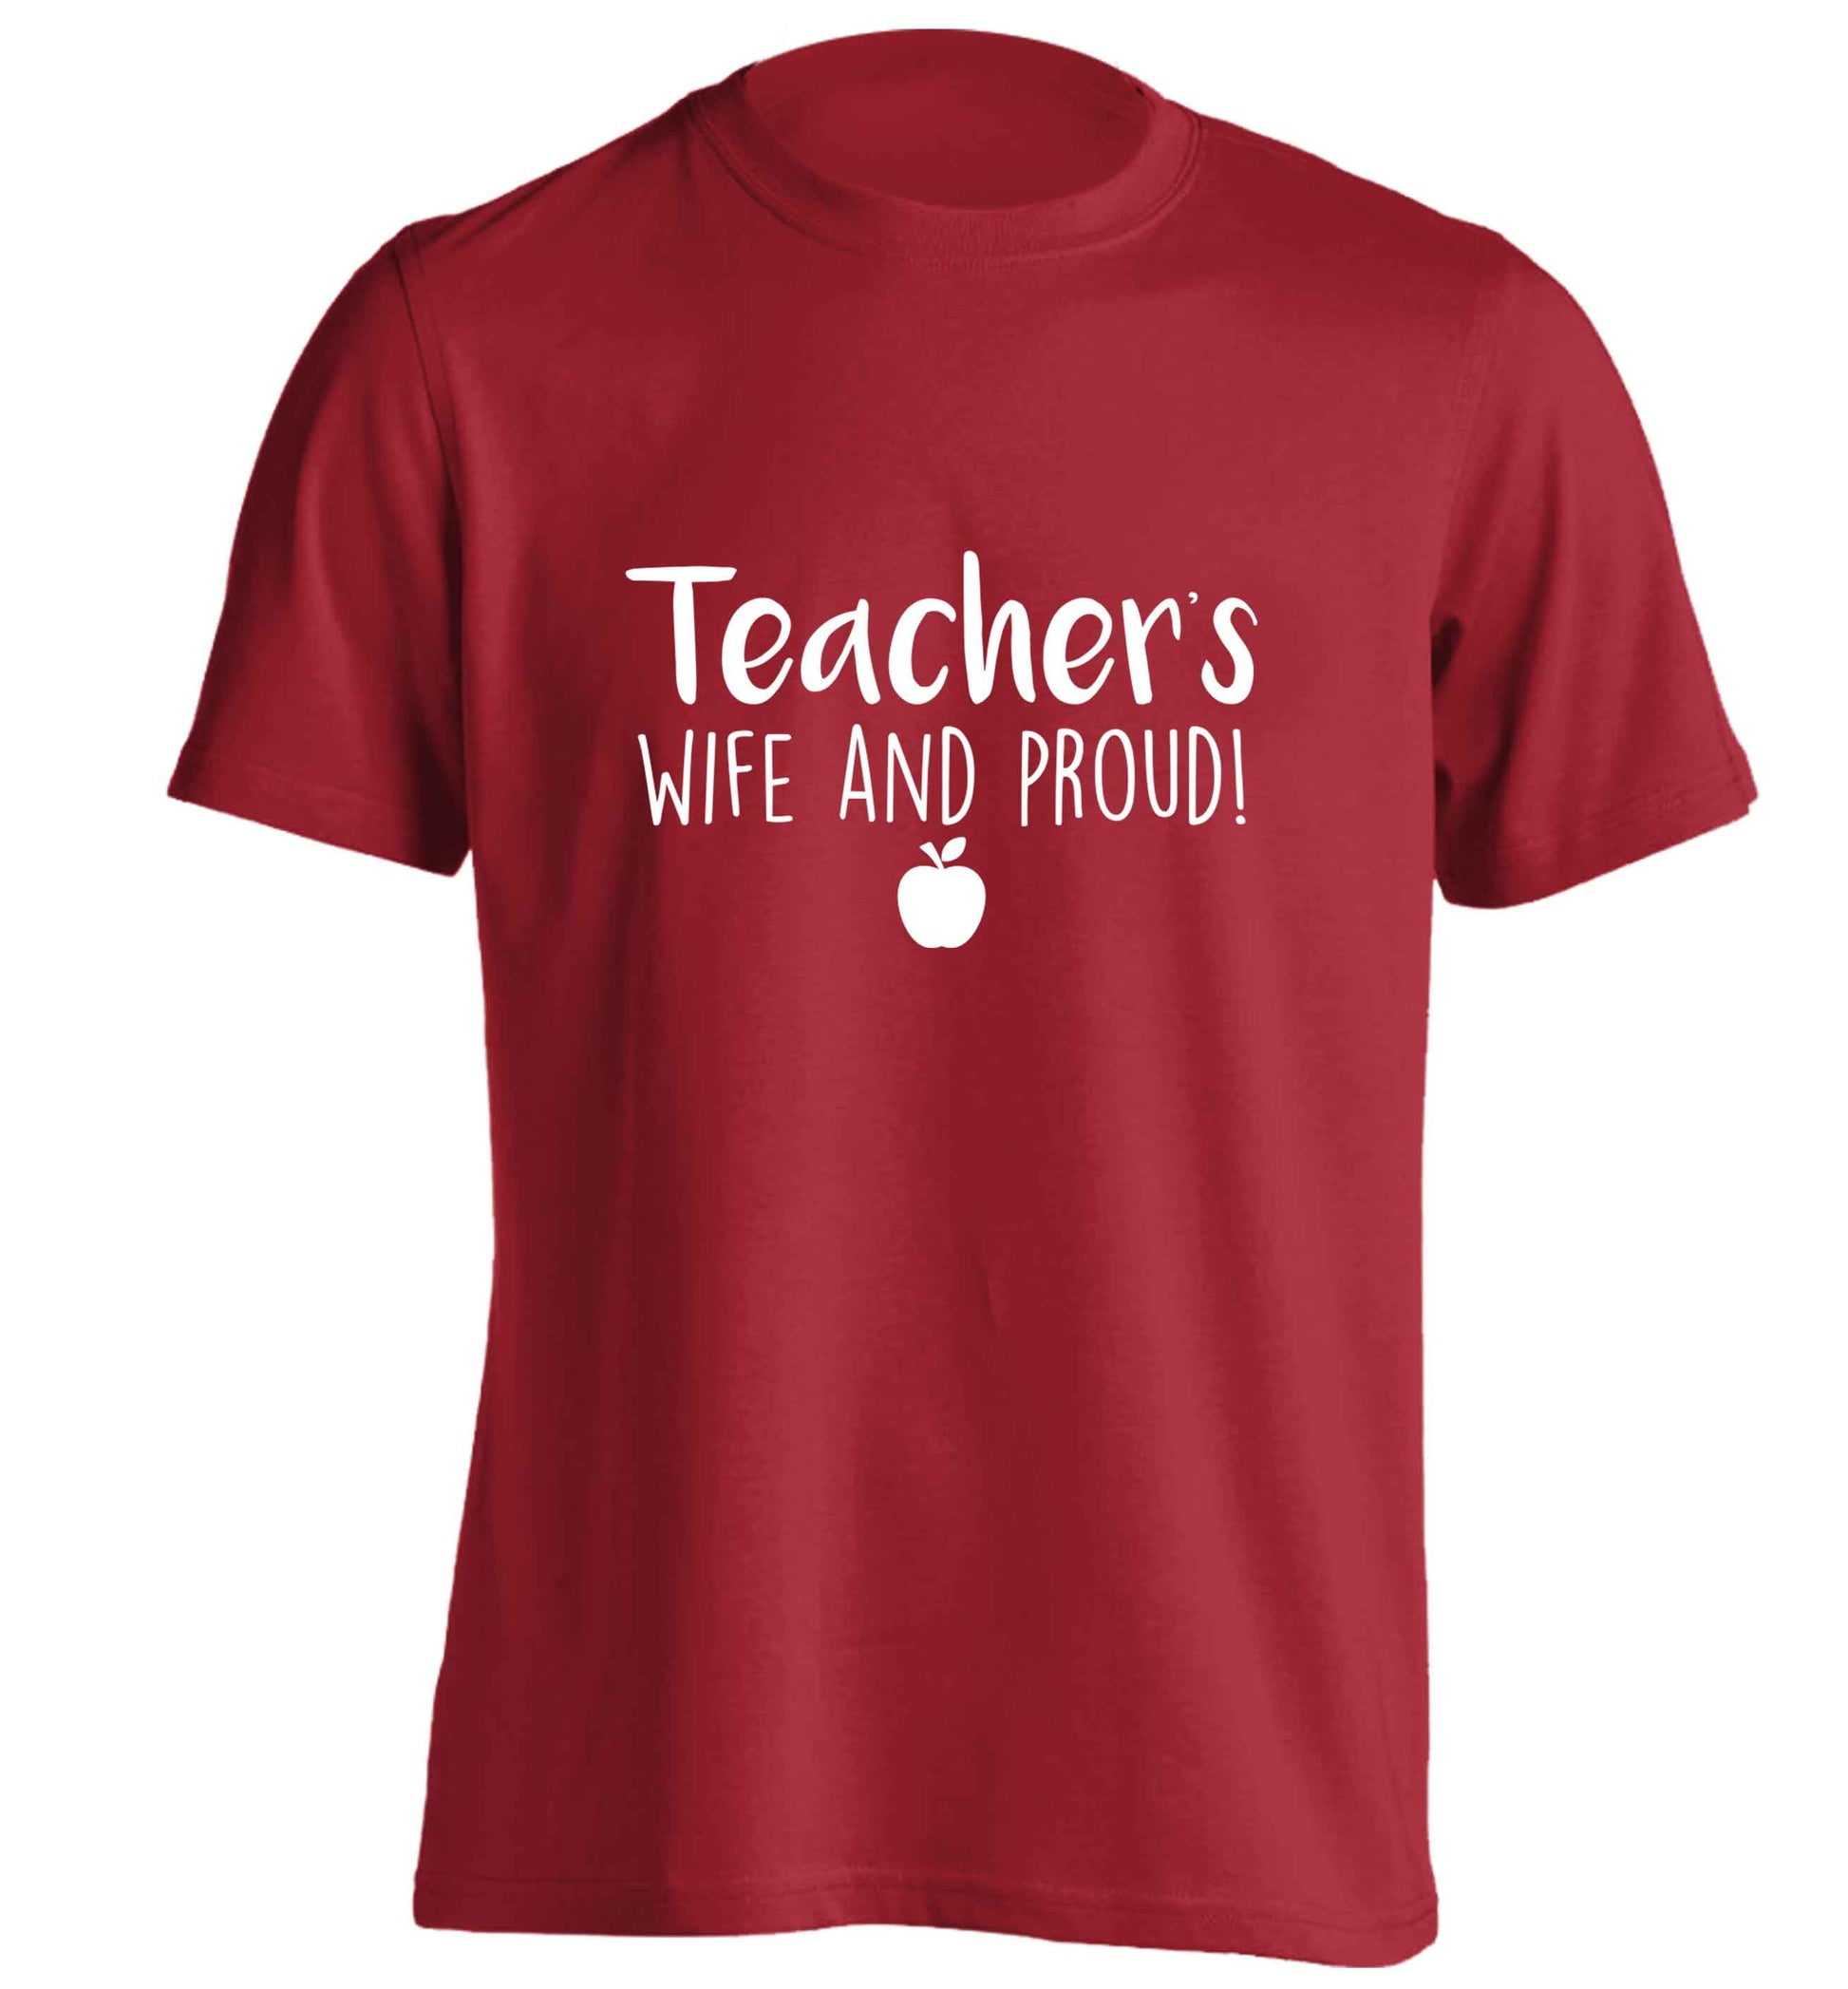 Teachers wife and proud adults unisex red Tshirt 2XL